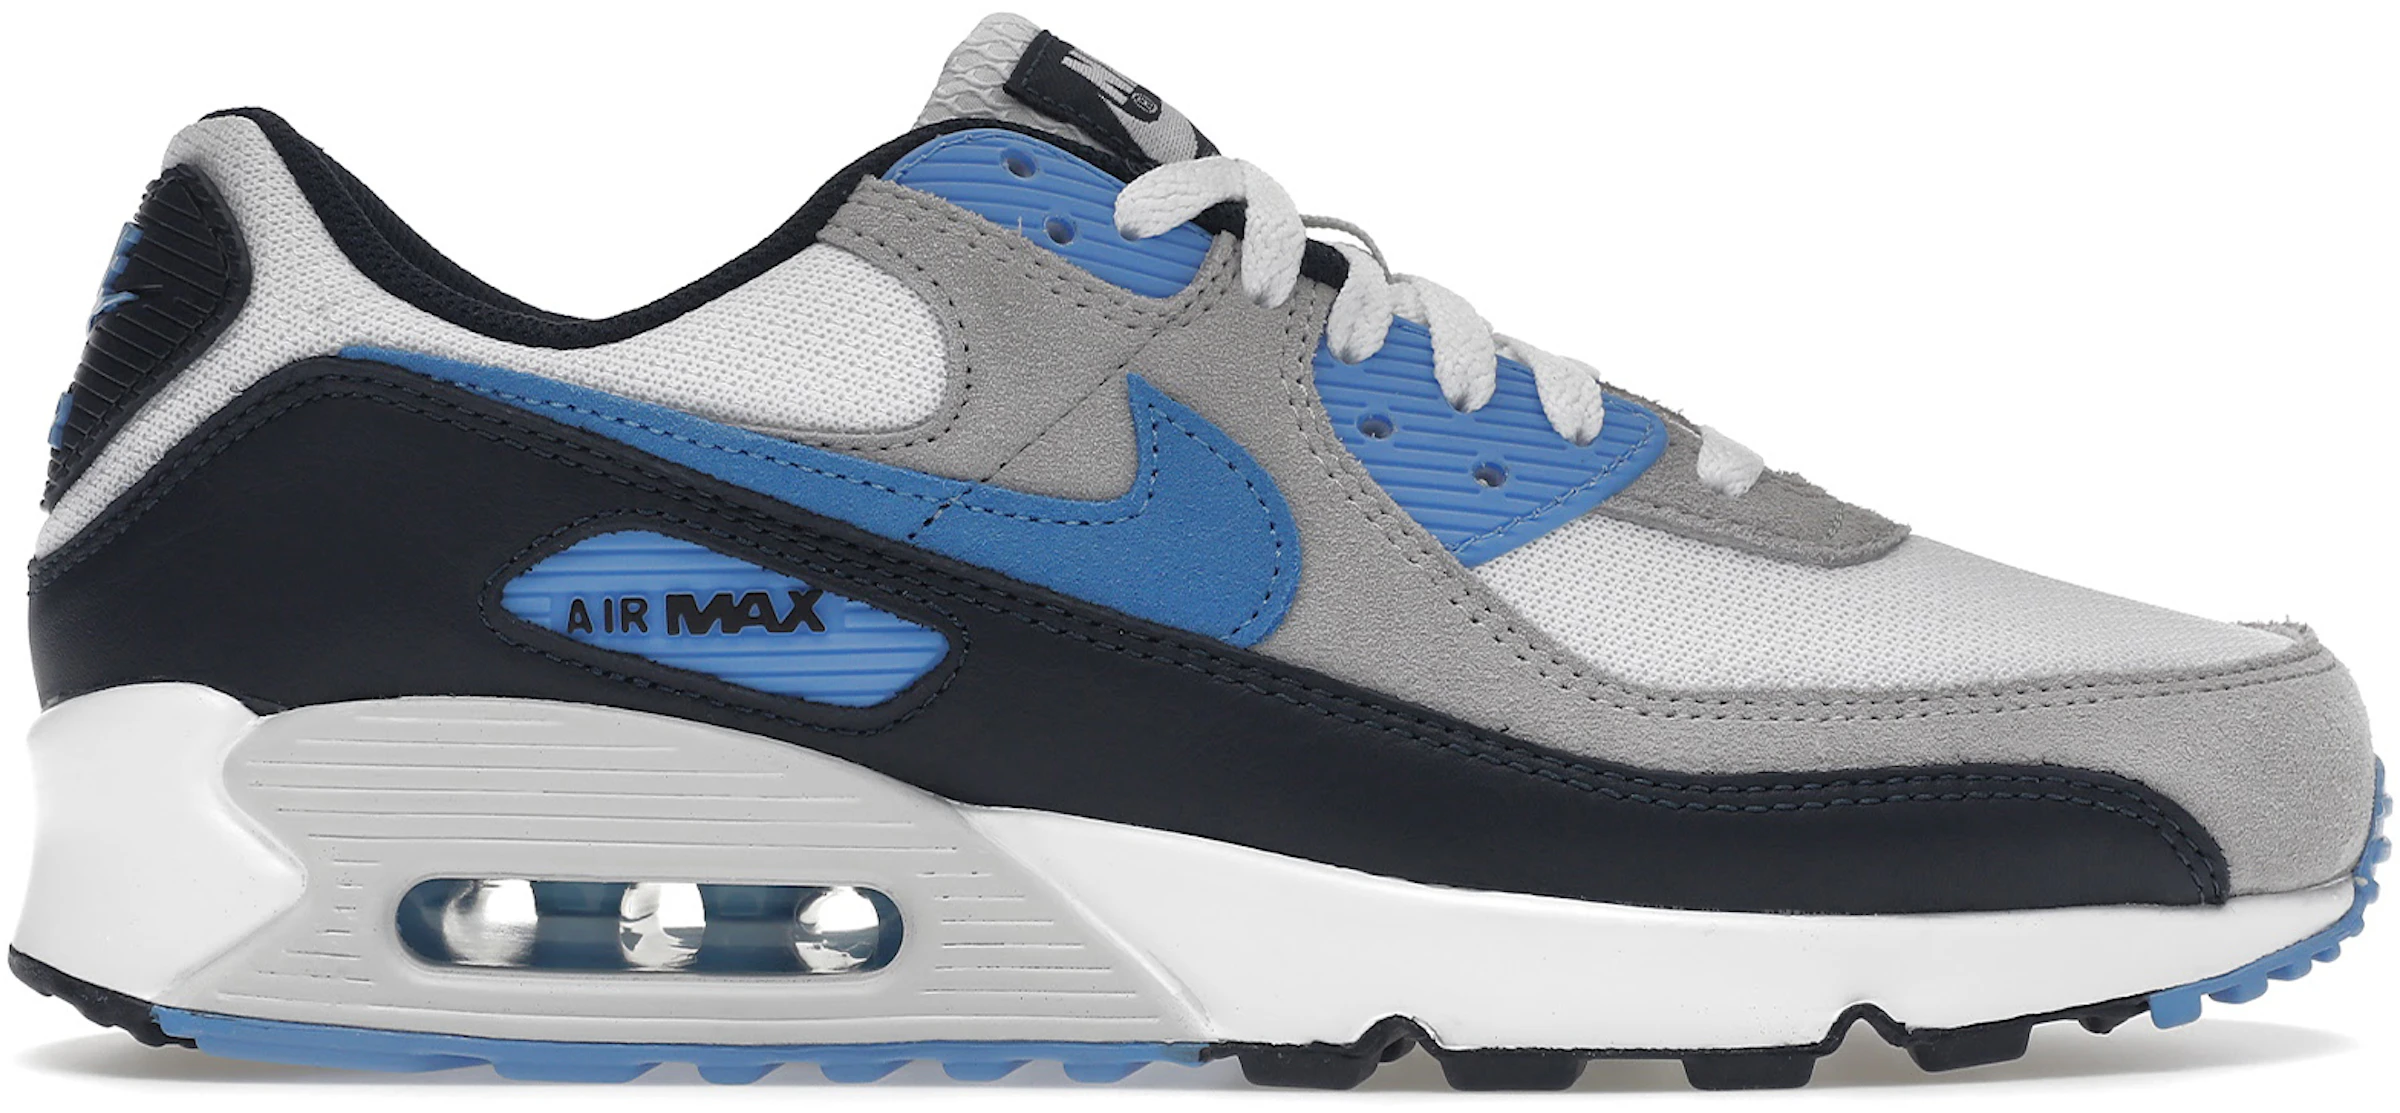 ruw cassette Een effectief Air Max 90 - All Sizes & Colorways at StockX